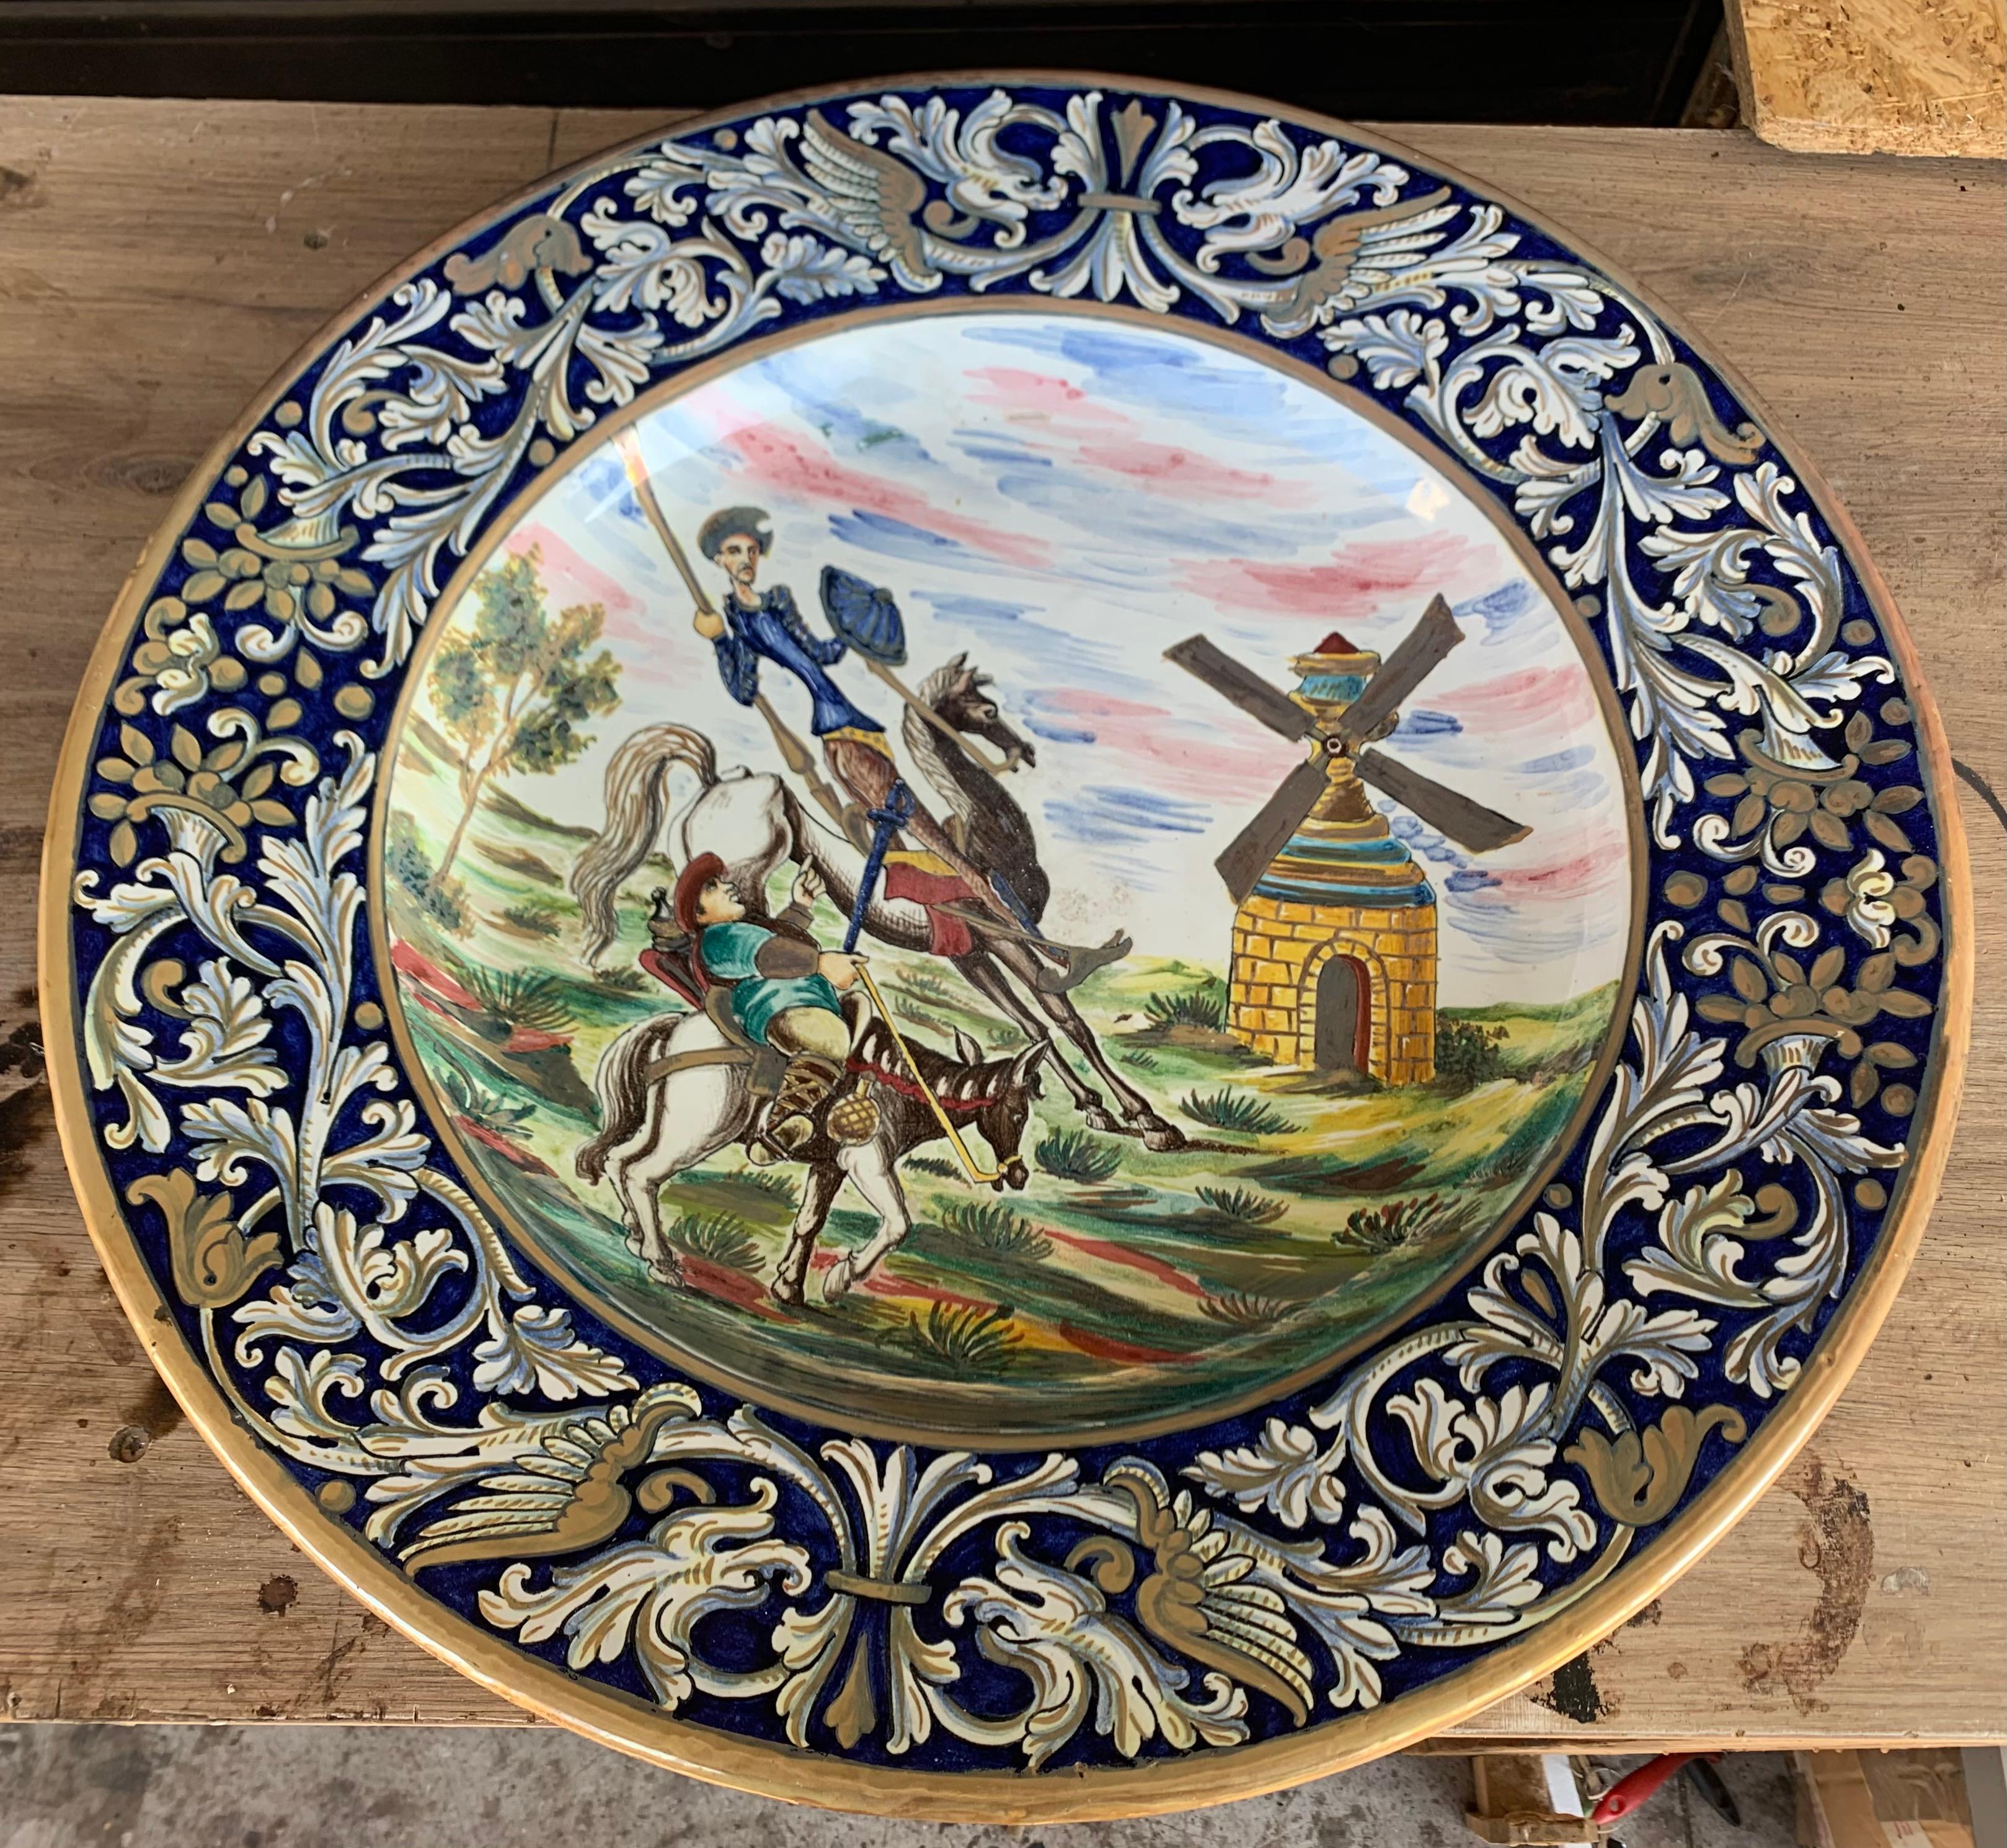 This beautiful plate features Don Quixote, the most popular character in Spain from the Spanish literature.
The dish has iridiscents details and a foliate decoration in the edge. The main picture features a typical scene of this book.